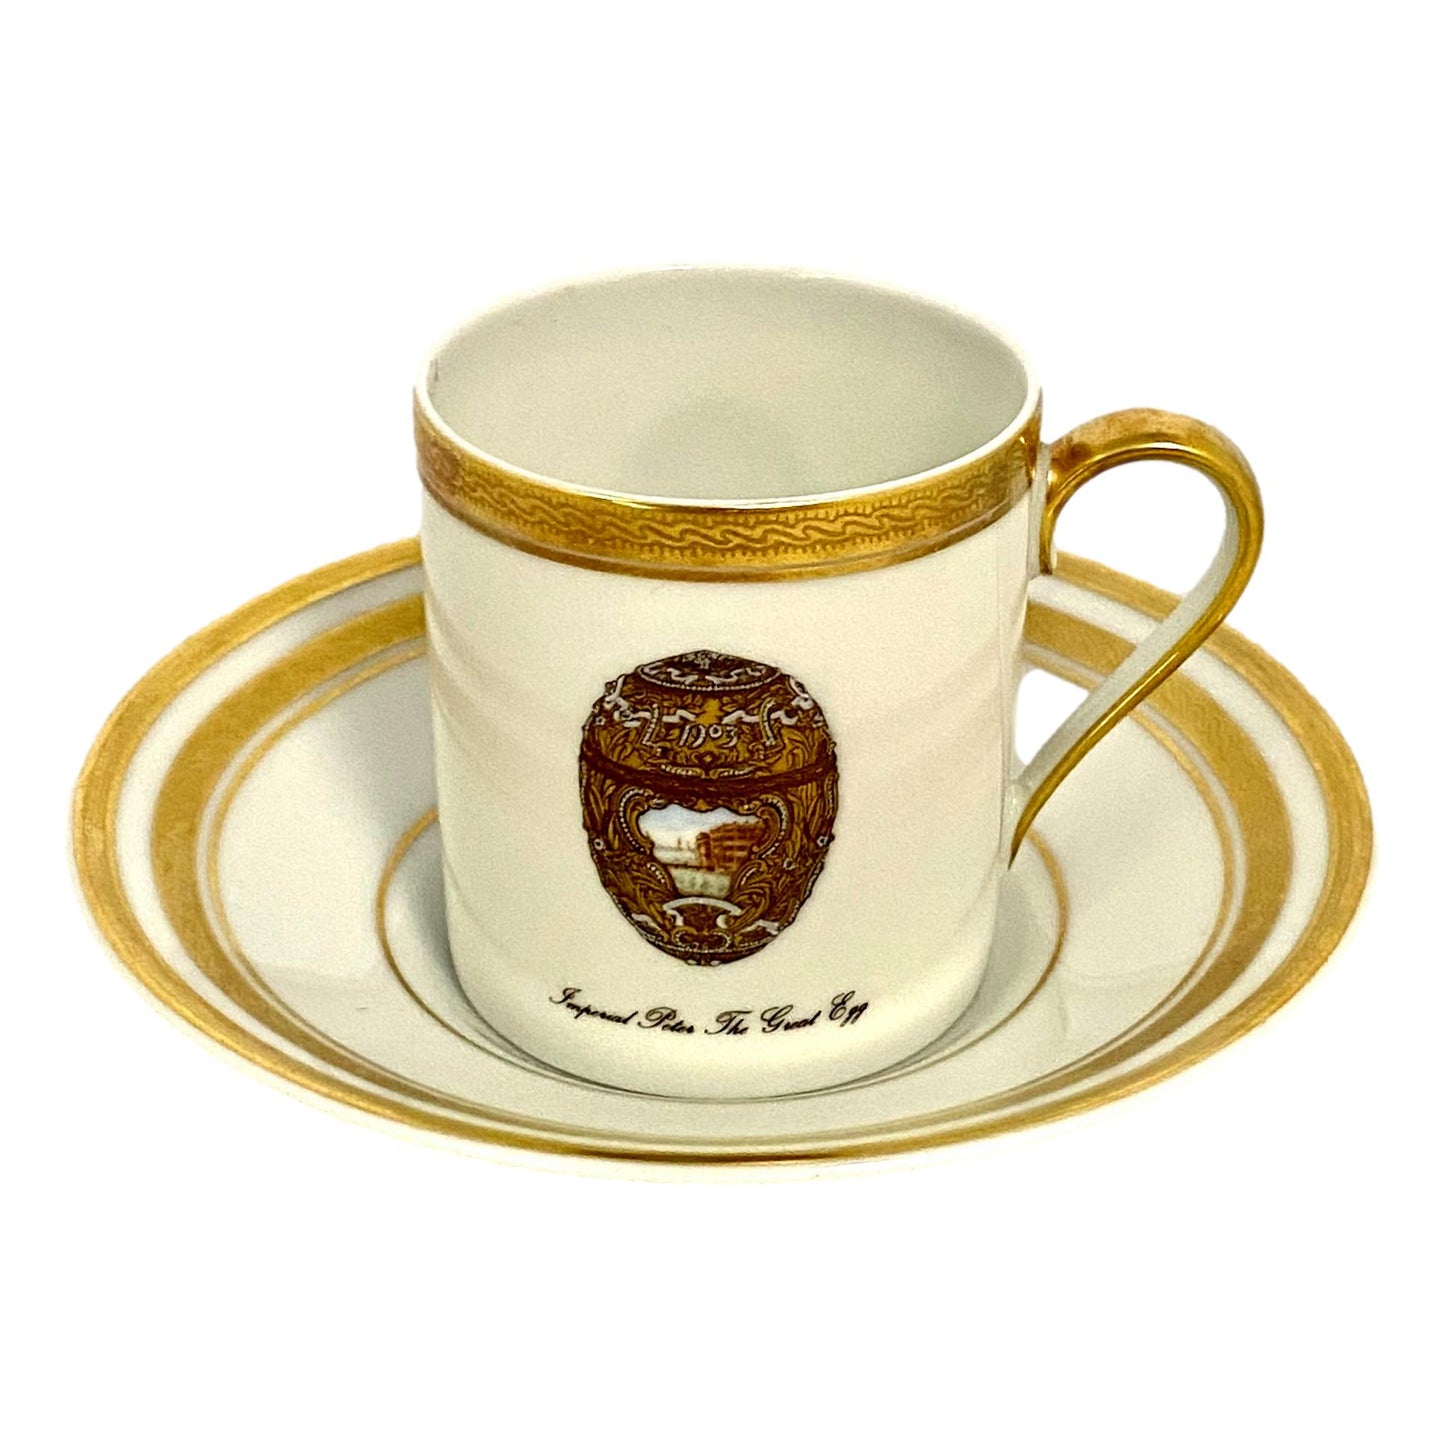 Faberge Demitasse Cup & Saucer